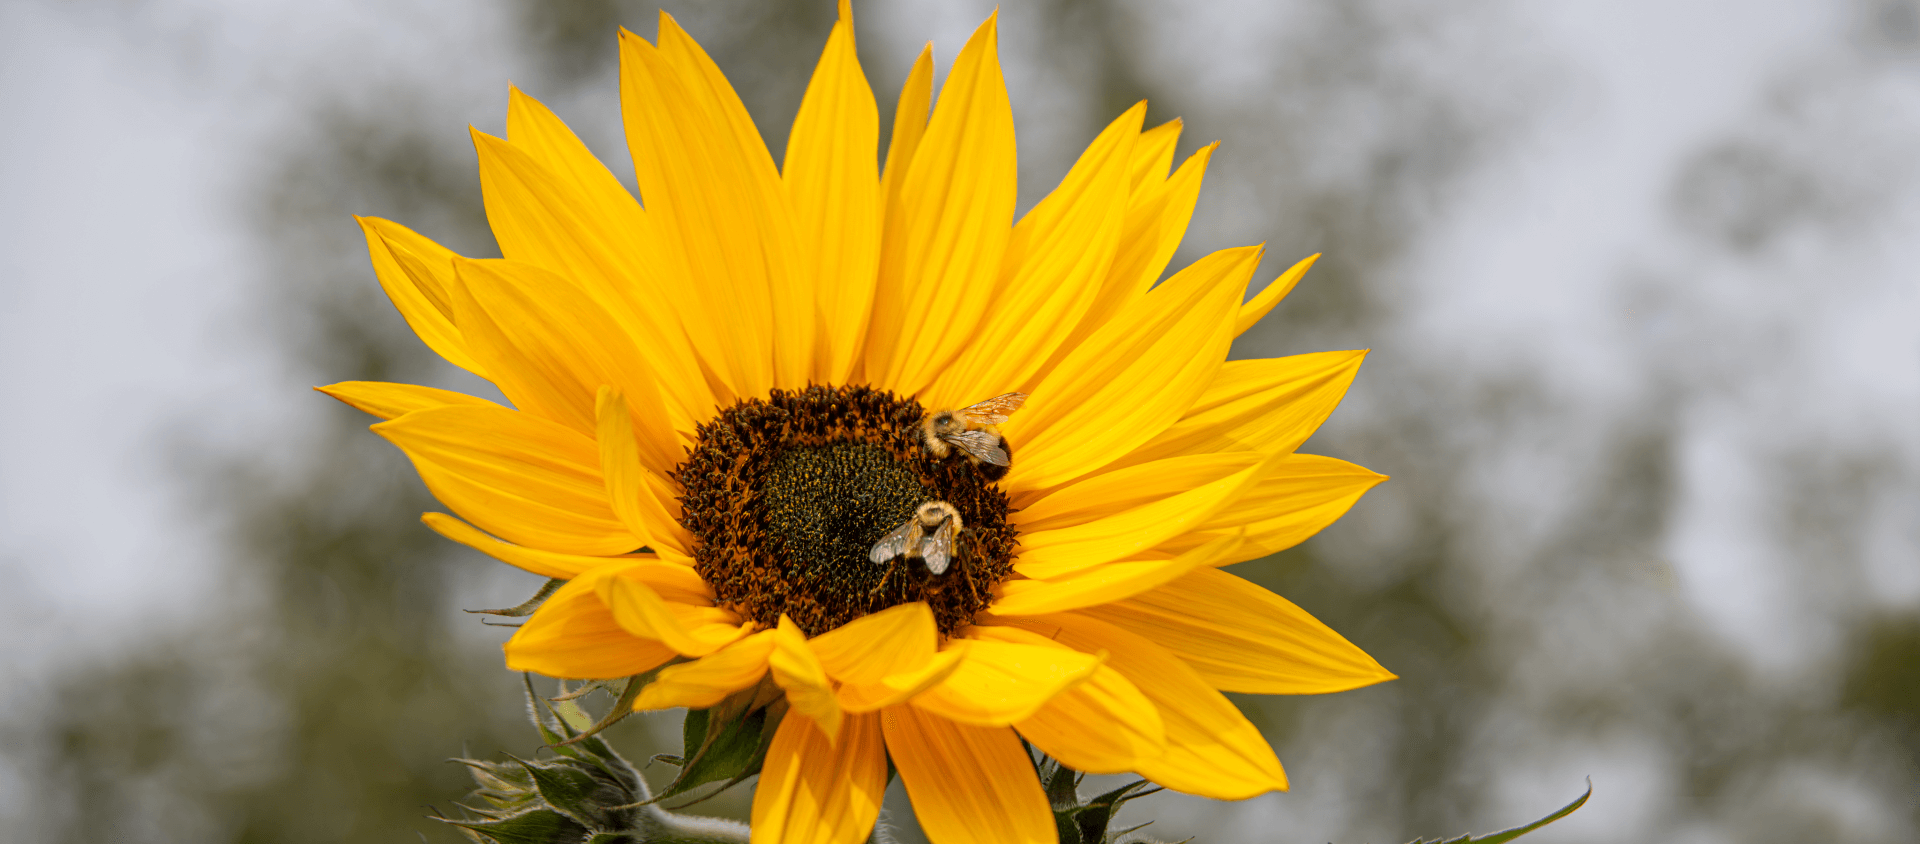 Close-up of a yellow sunflower with two bees in the center